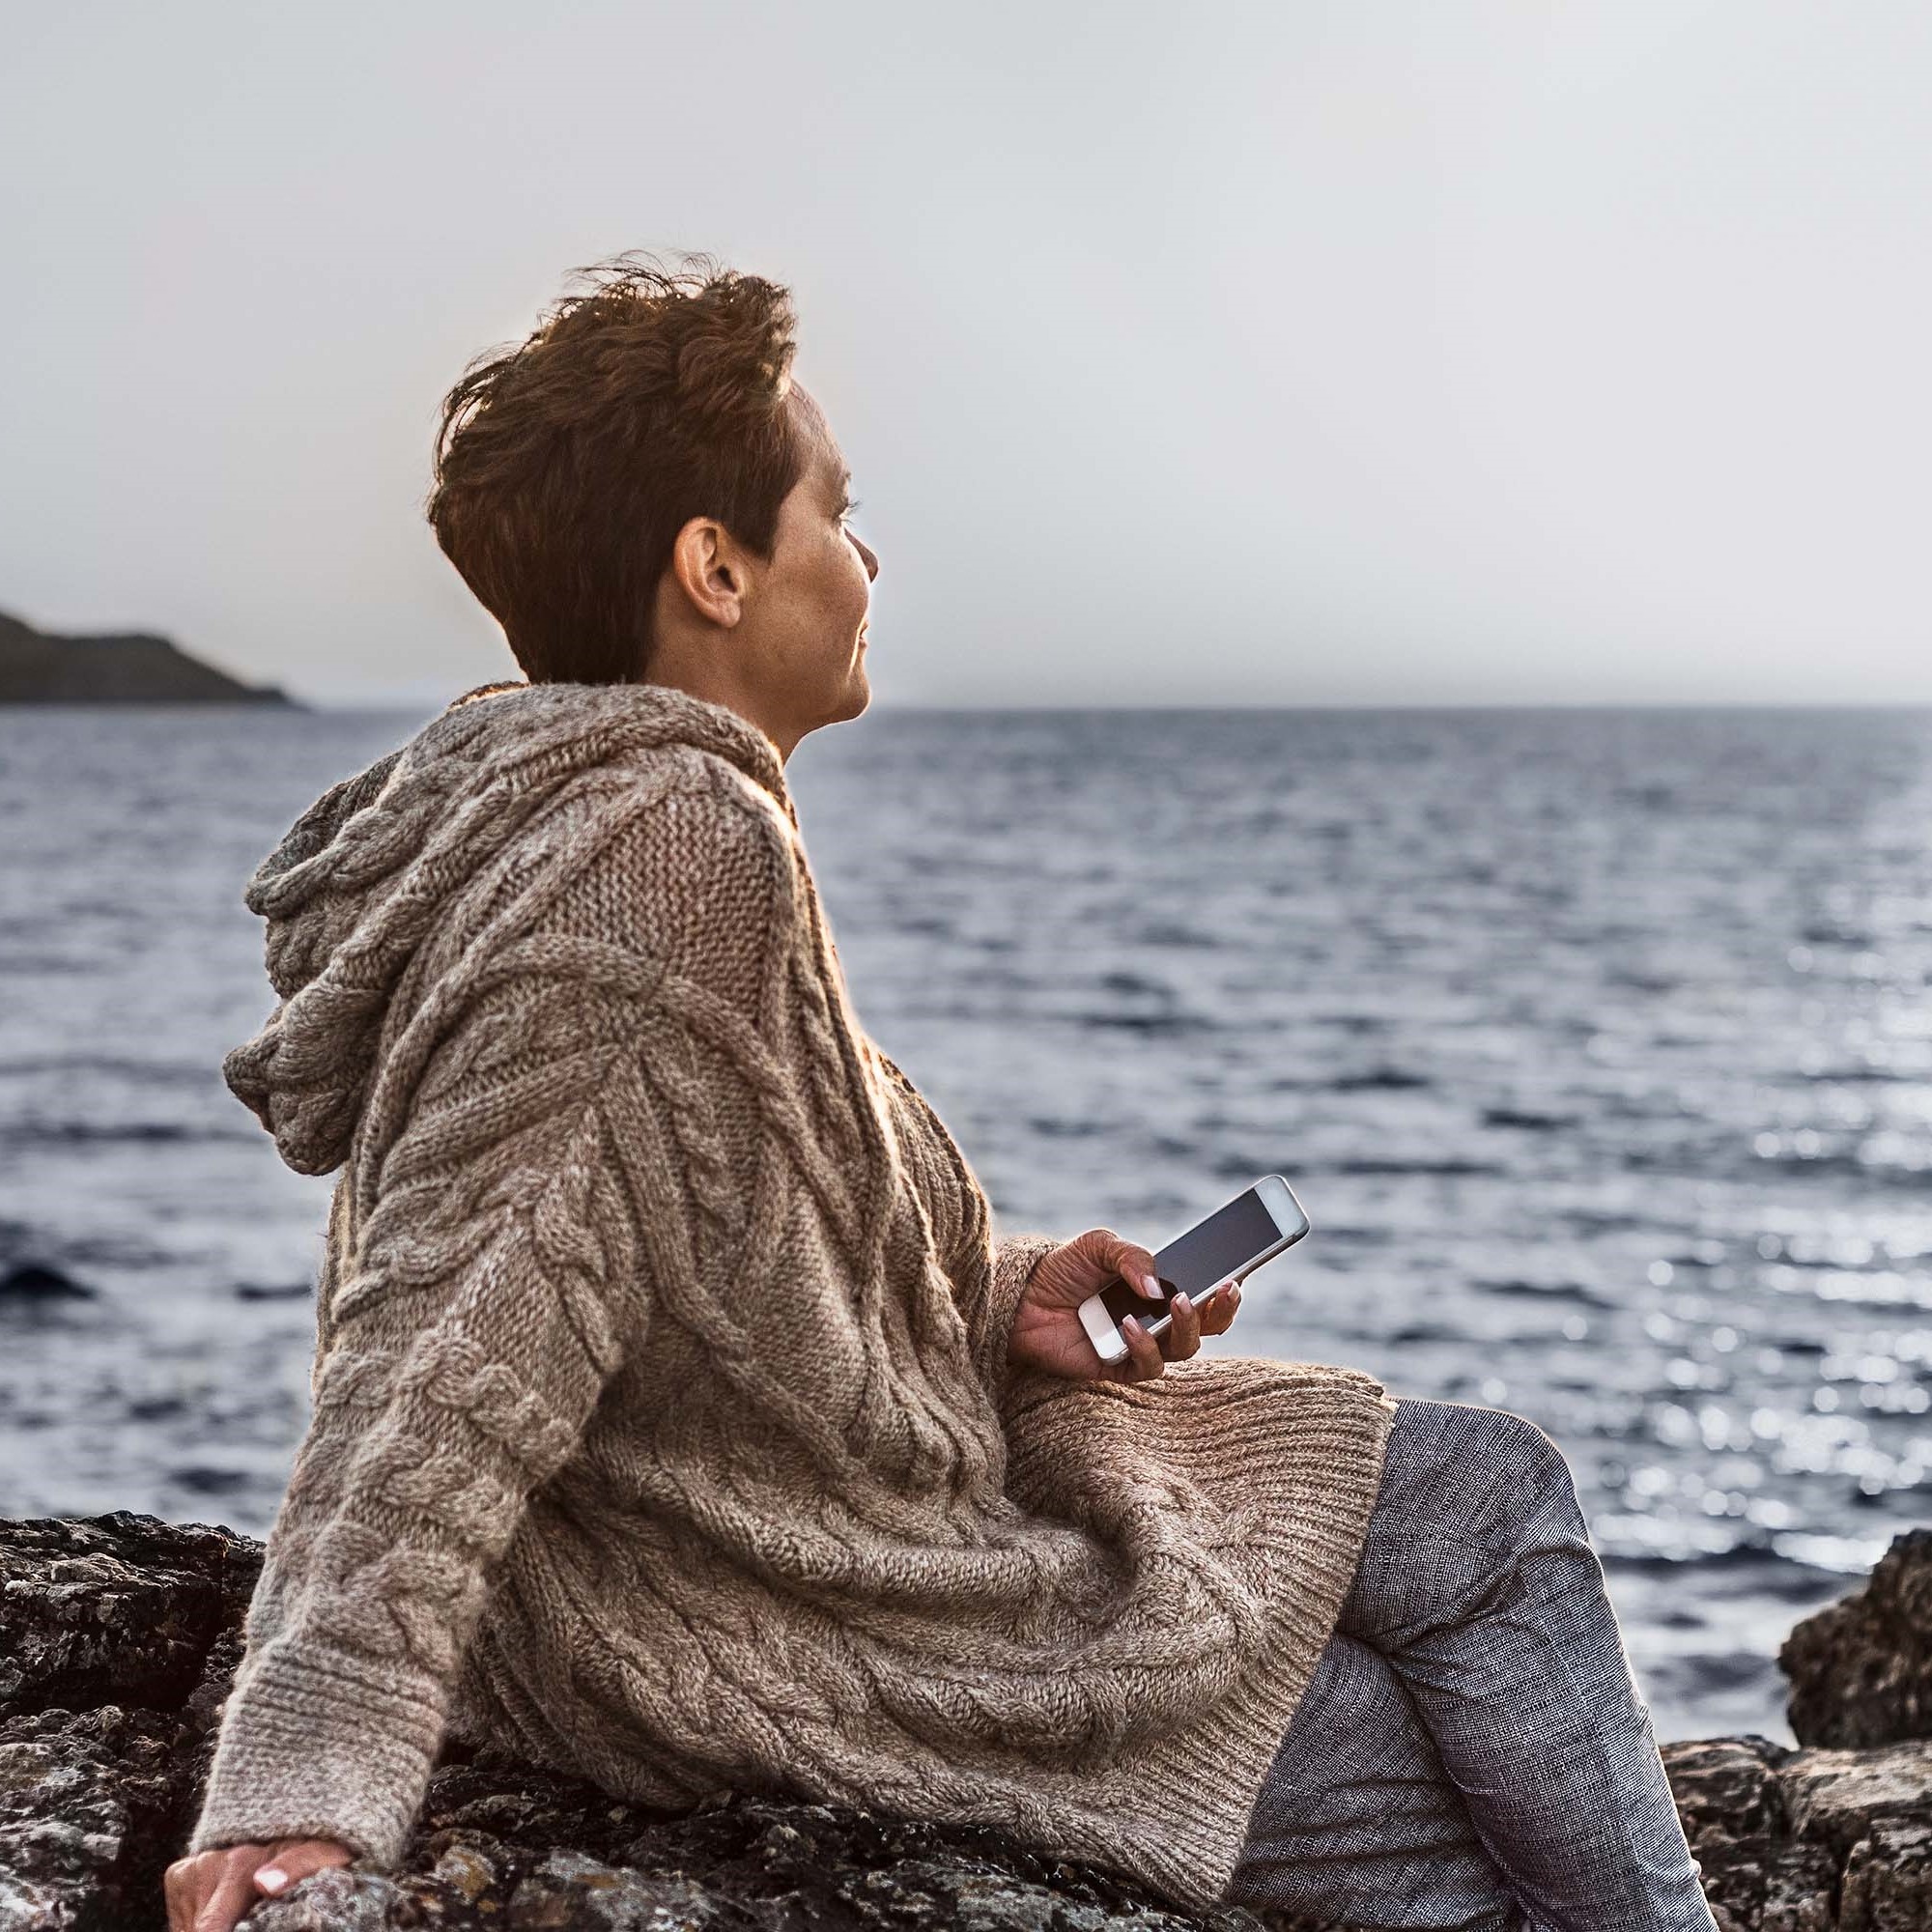 A person sits by the seashore, sitting on rocks, holding a mobile telephone.